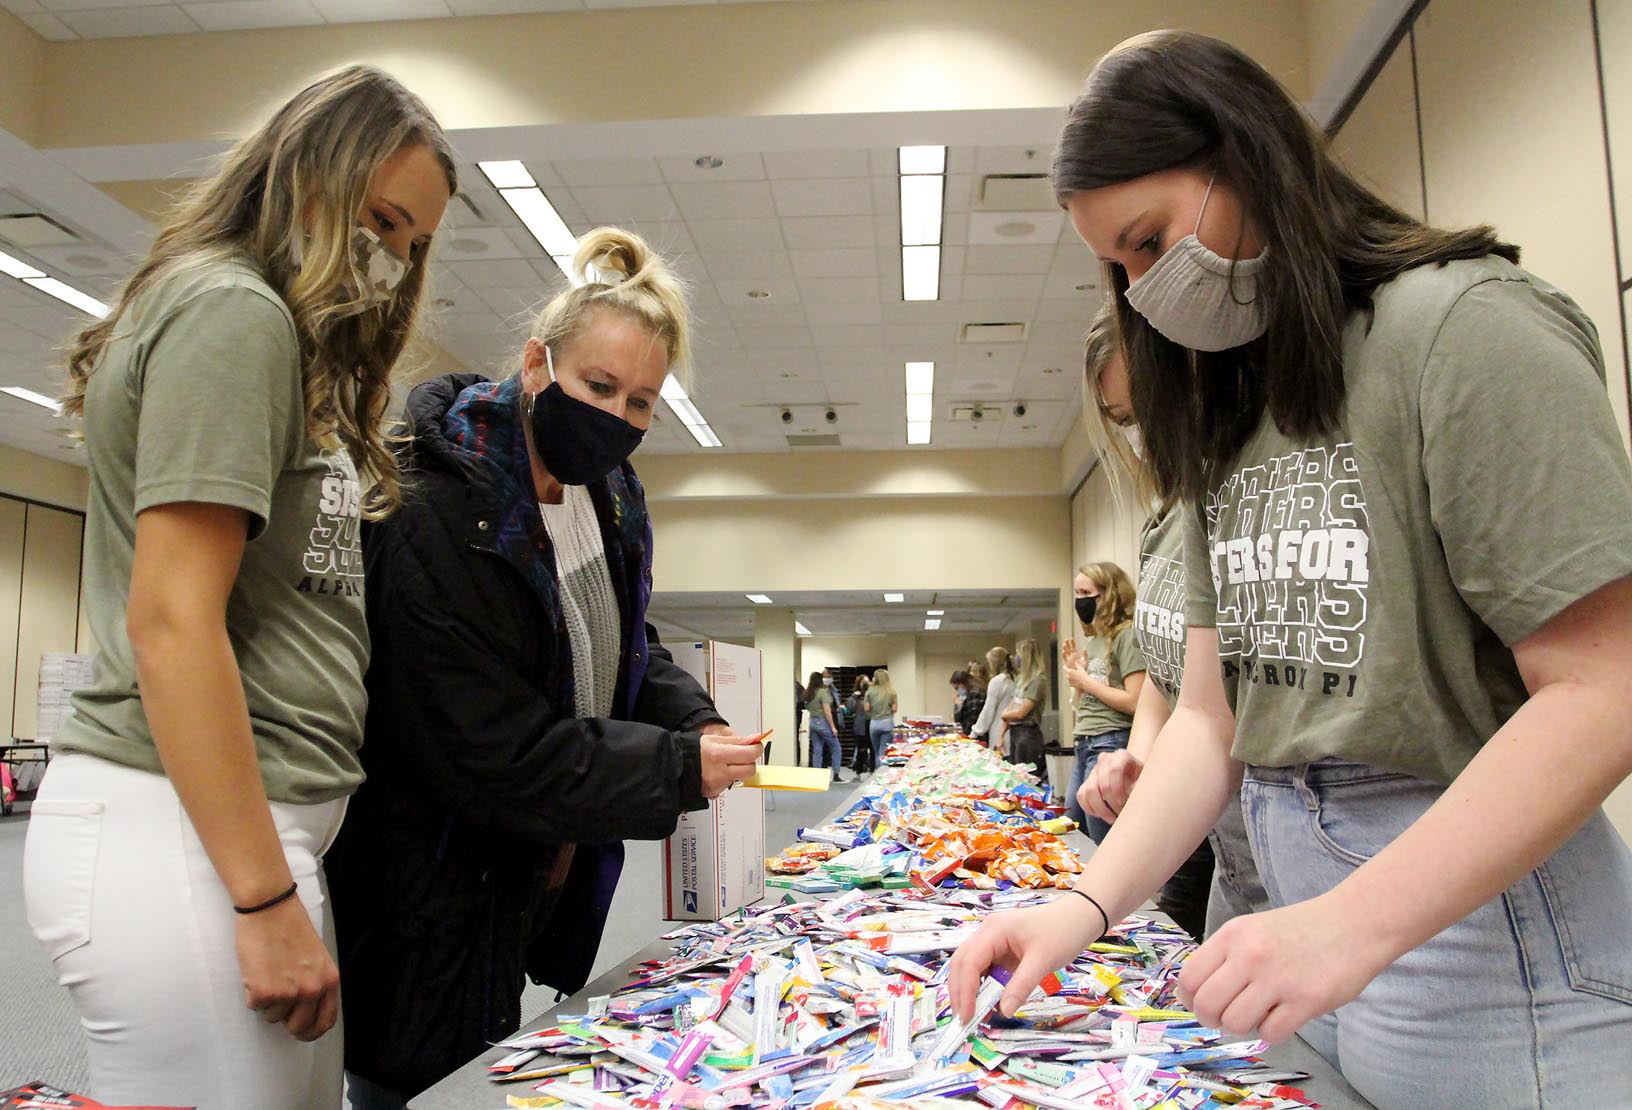 Alpha Omicron Pi members Jessie Daake of Kearney, left, and Ashley Sweet of North Platte, right, help Daake’s mother Lynda create a care package for a U.S. military member during Tuesday evening’s Sisters for Soldiers event.